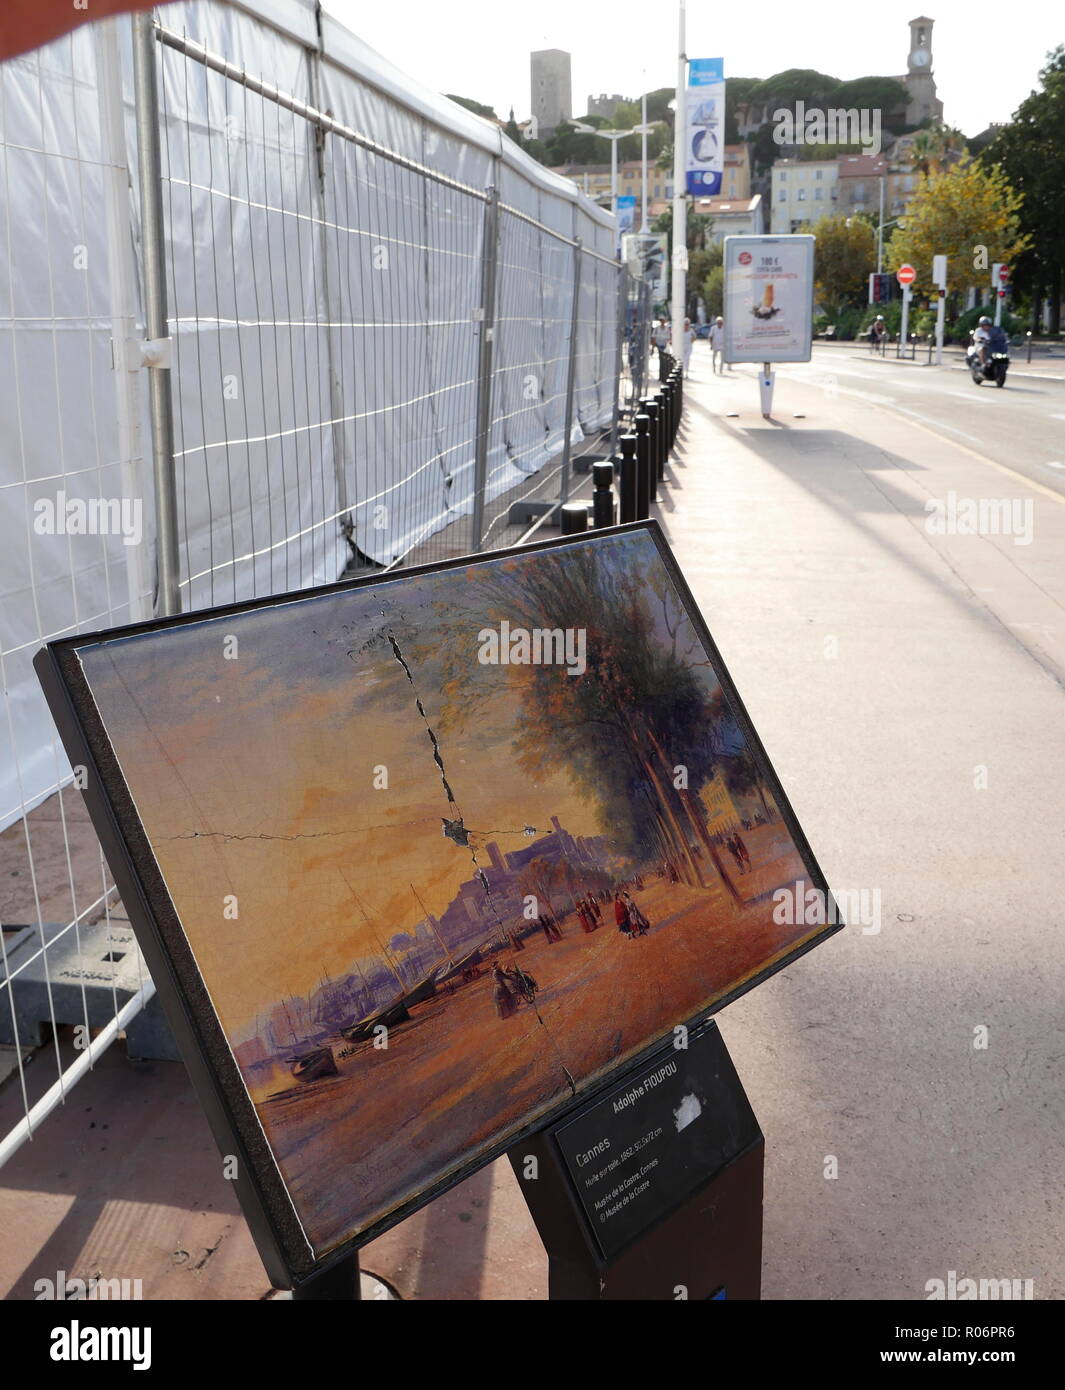 AJAXNETPHOTO. 2018. CANNES, FRANCE. - BORDS DE LA MEDITERRANEE - INFORMATION PANEL FOR OIL PAINTING OF CANNES CROISETTE WITH THE SUQUET DISTANT BY ADOLPHE FIOUPOU 1862; ORIGINAL PAINTING HOUSED IN THE MUSEE DE LA CASTRE.  PHOTO:JONATHAN EASTLAND/AJAX REF:GX8 182509 575 Stock Photo